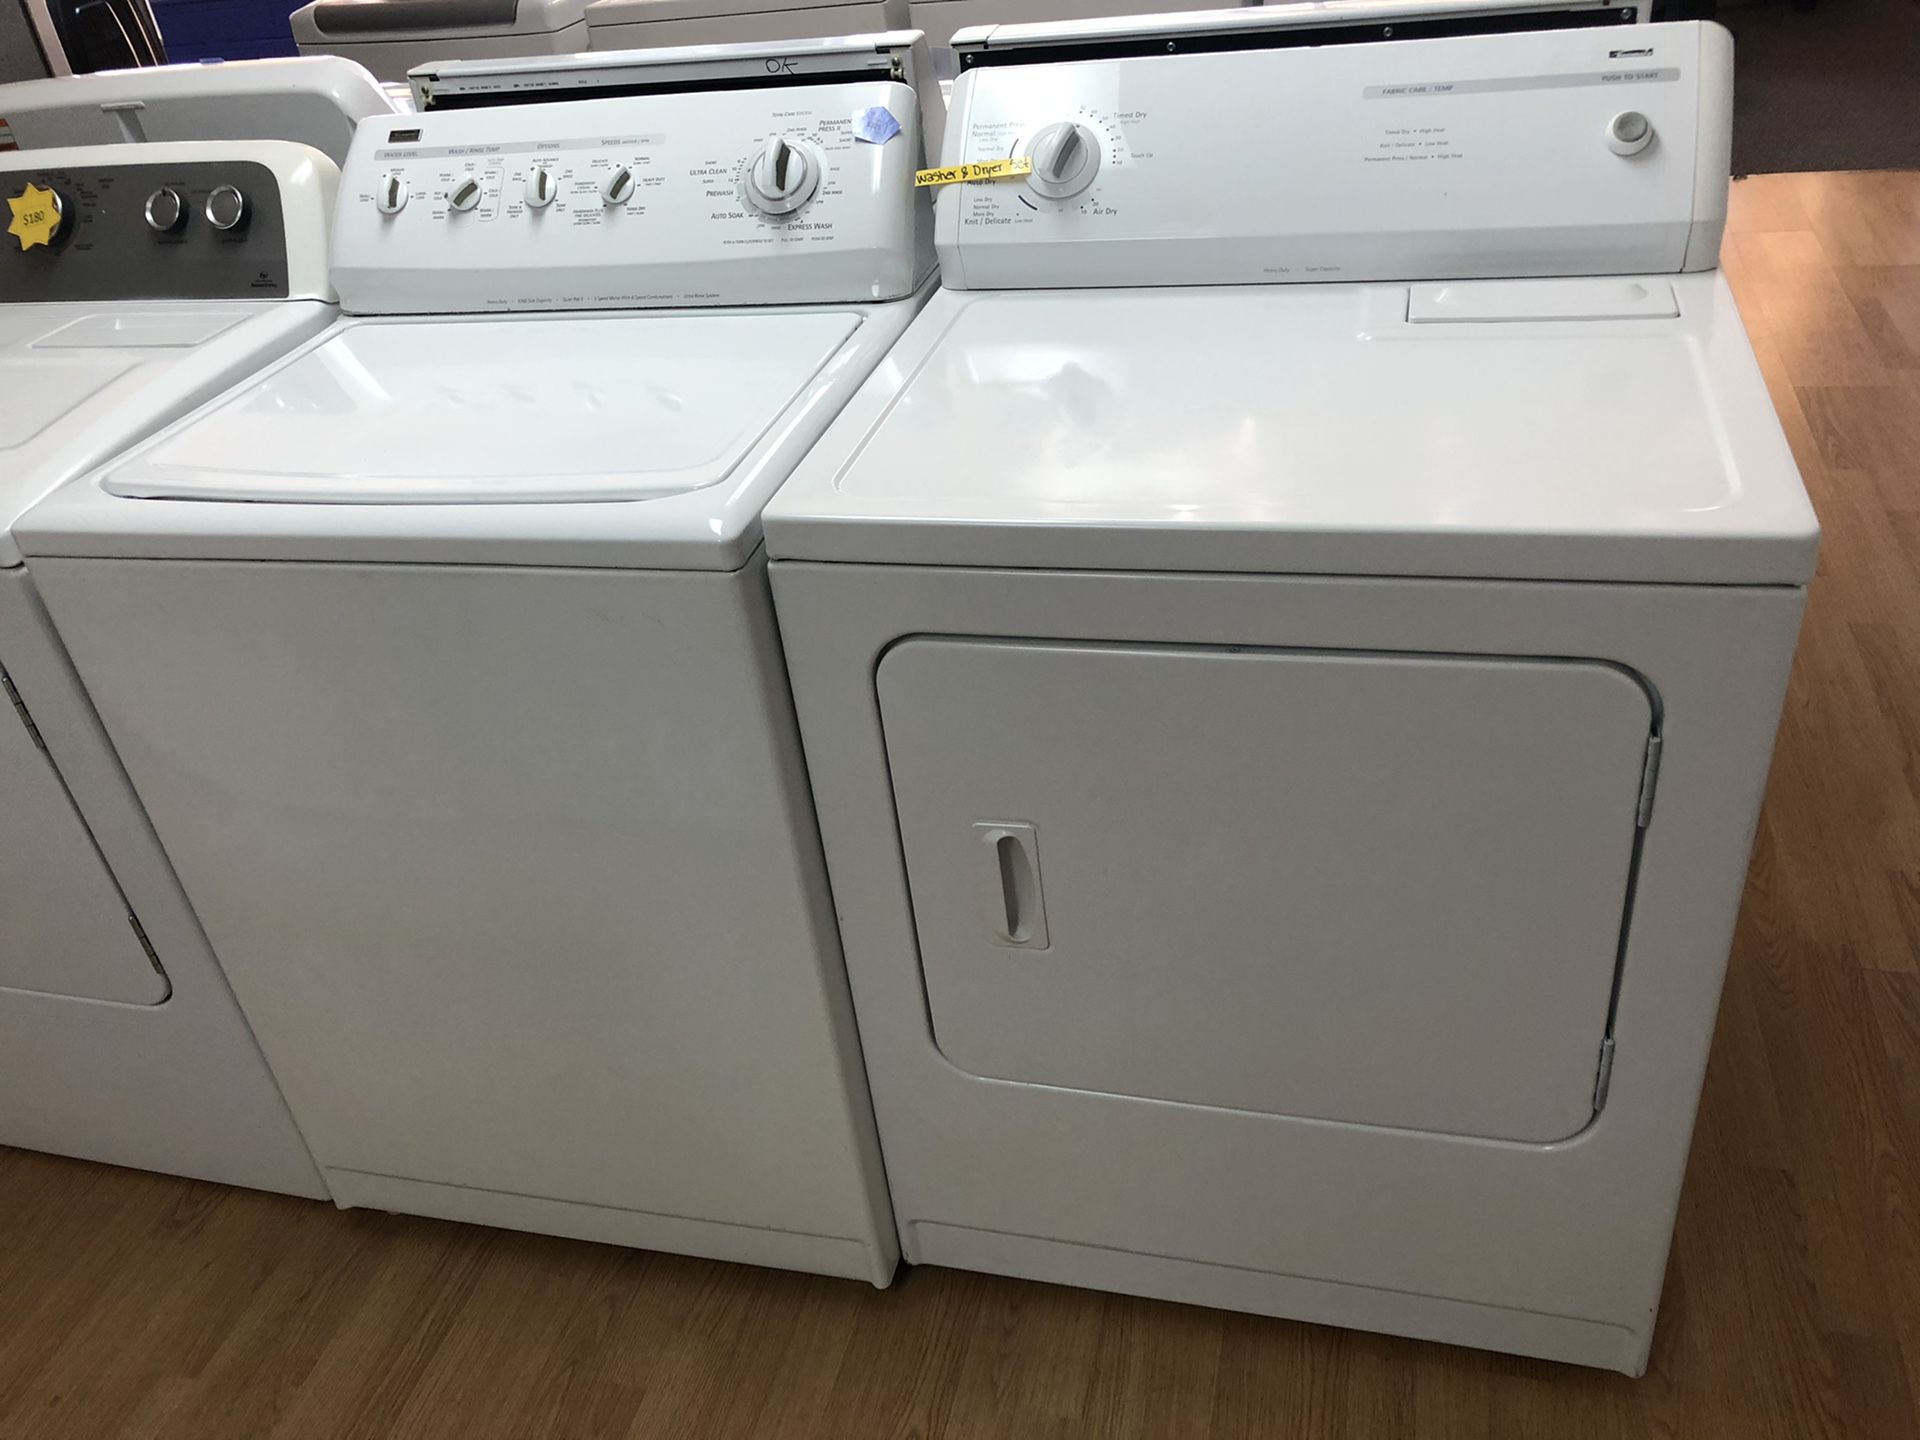 Kenmore white washer and dryer set